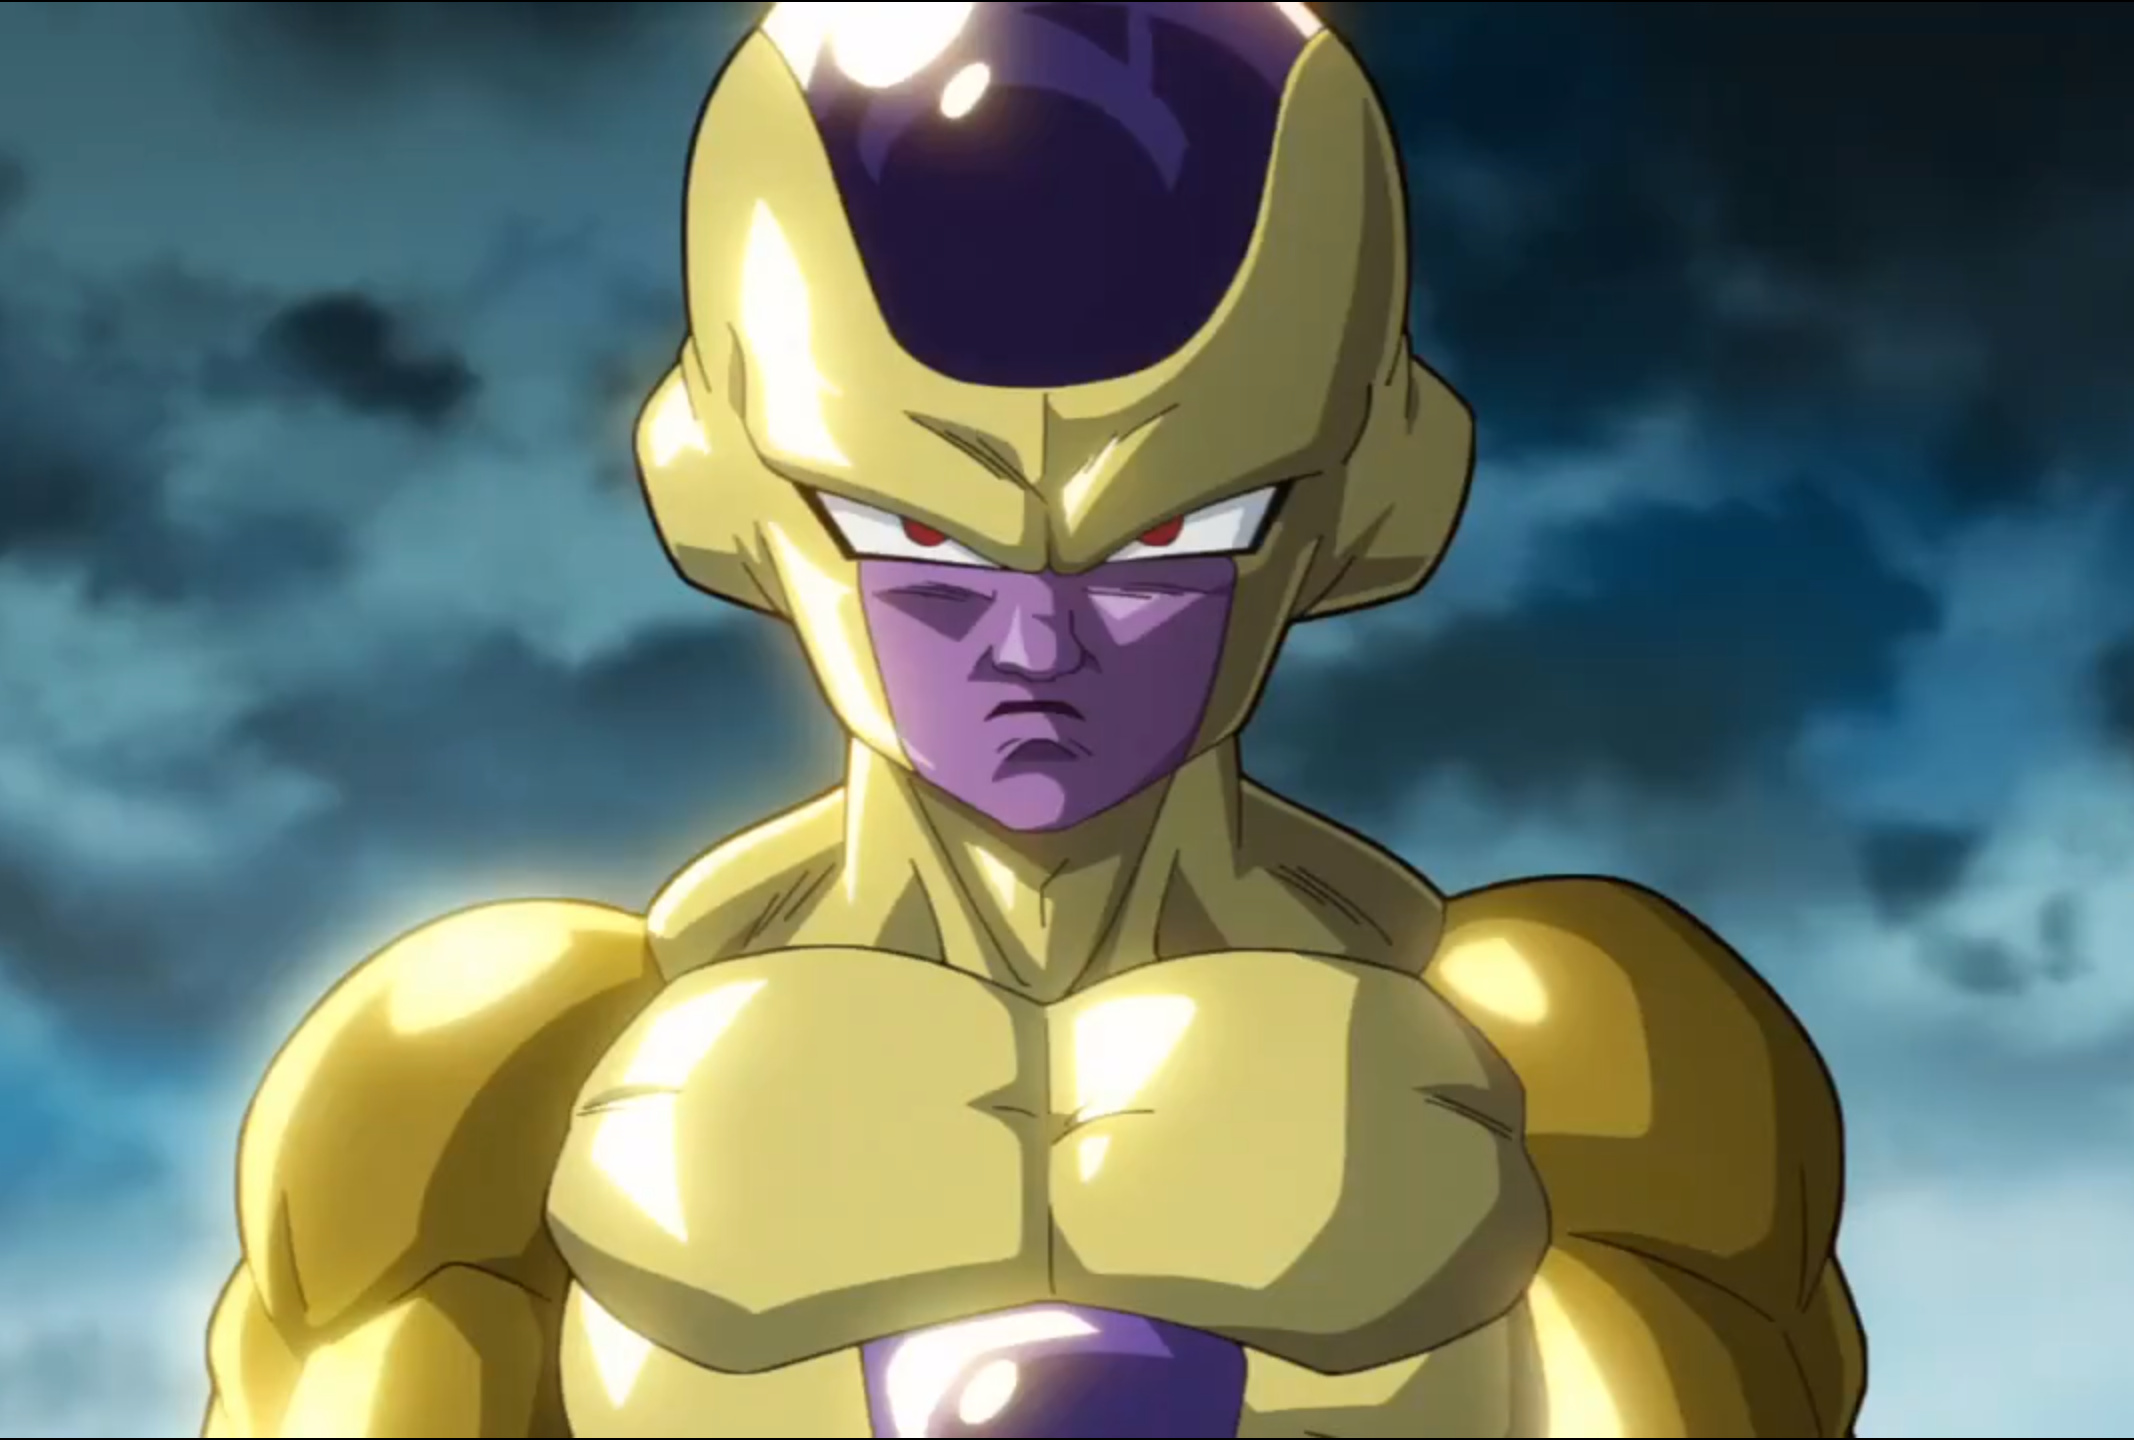 Golden Frieza: Fighting type, Unstoppable attack, Pokemon in a battle, Series 6, Anime film series, Cartoon. 2140x1440 HD Background.